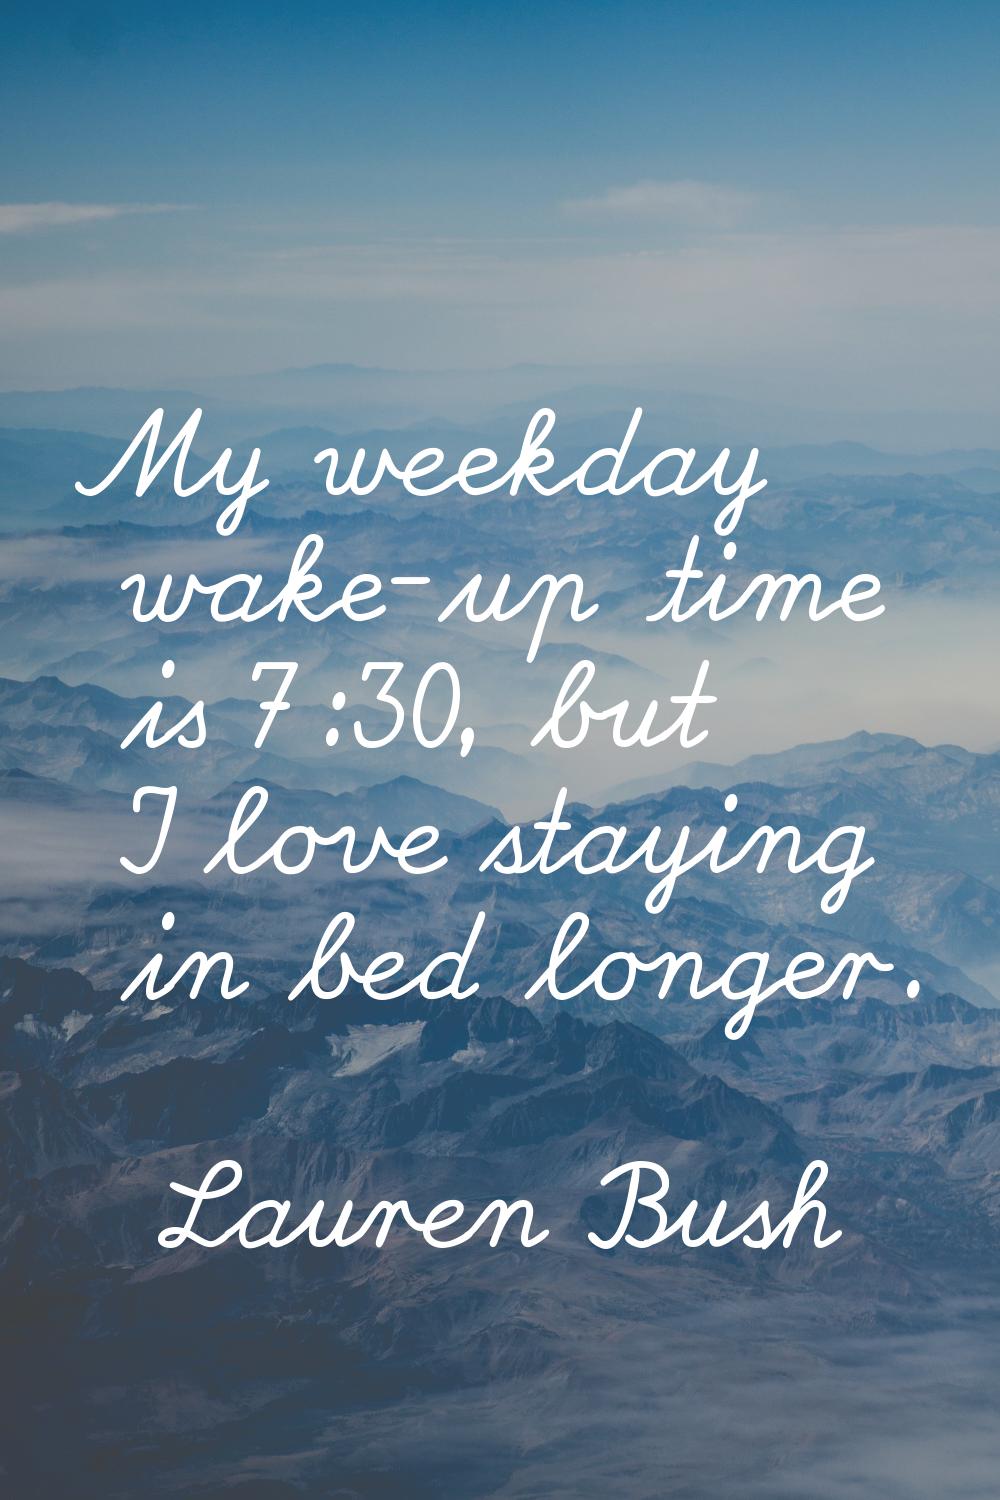 My weekday wake-up time is 7:30, but I love staying in bed longer.